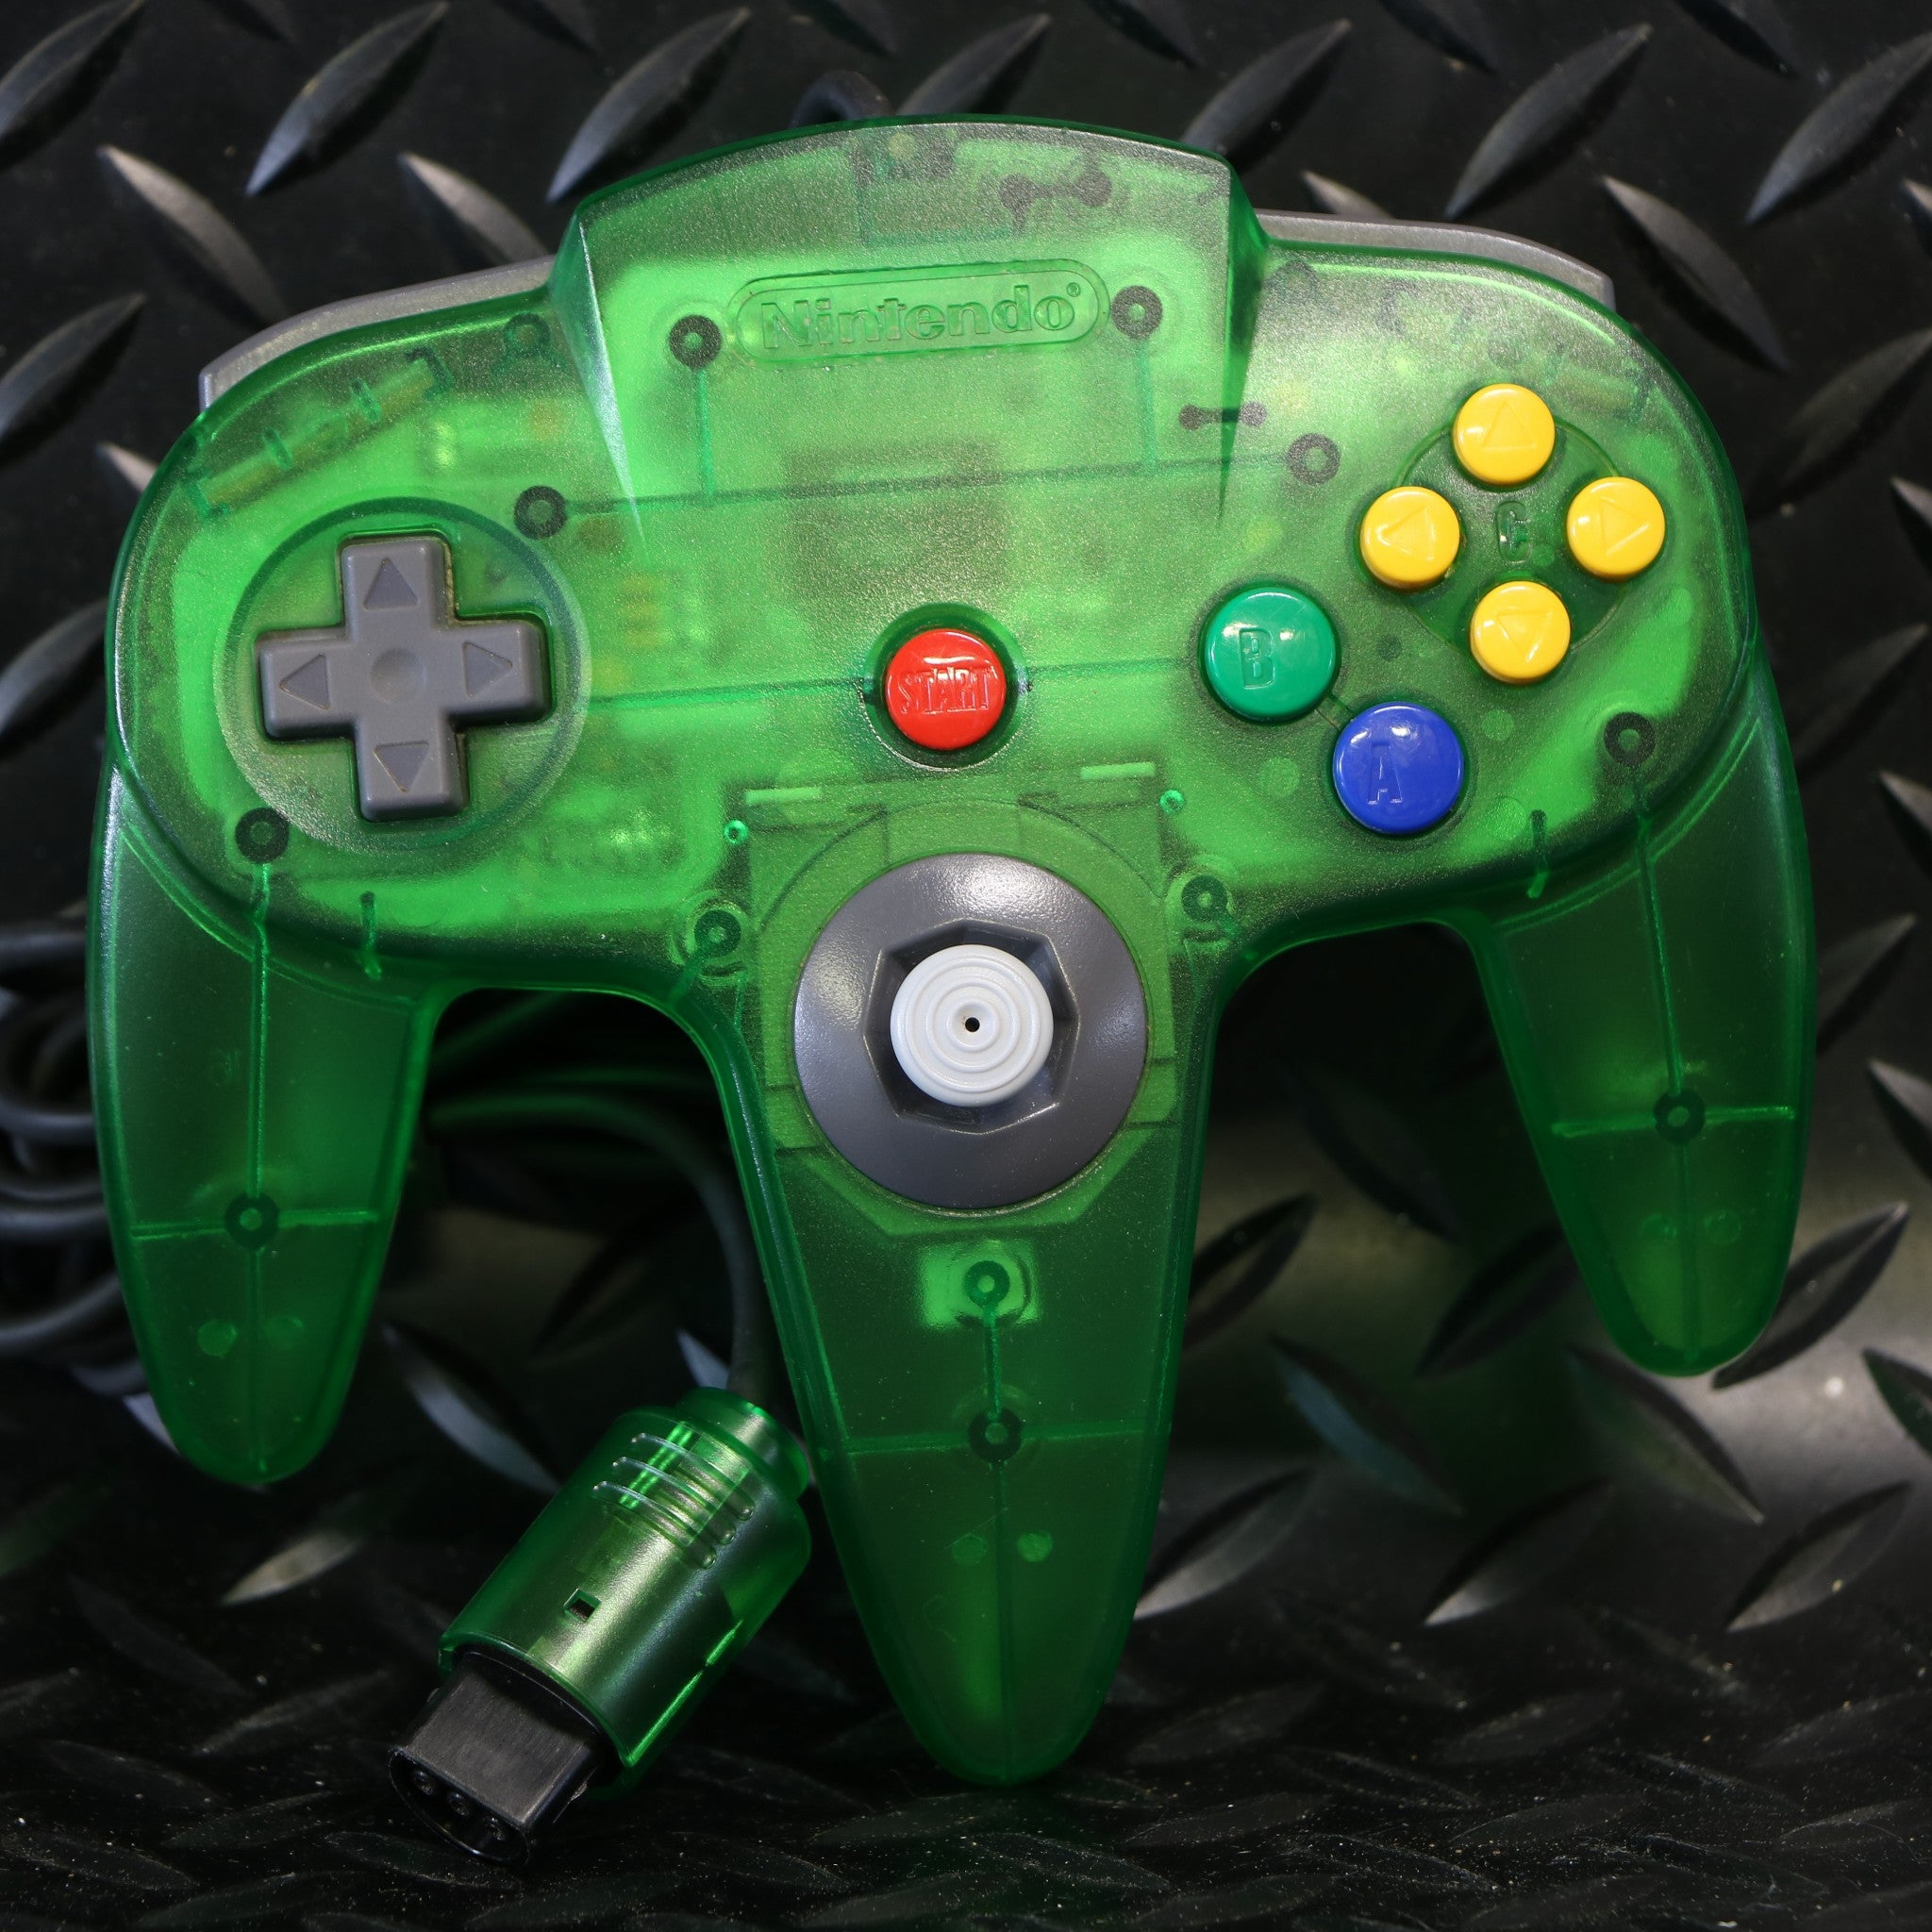 Nintendo 64 N64 Jungle Green Console Controller & Cables | Collectable Condition